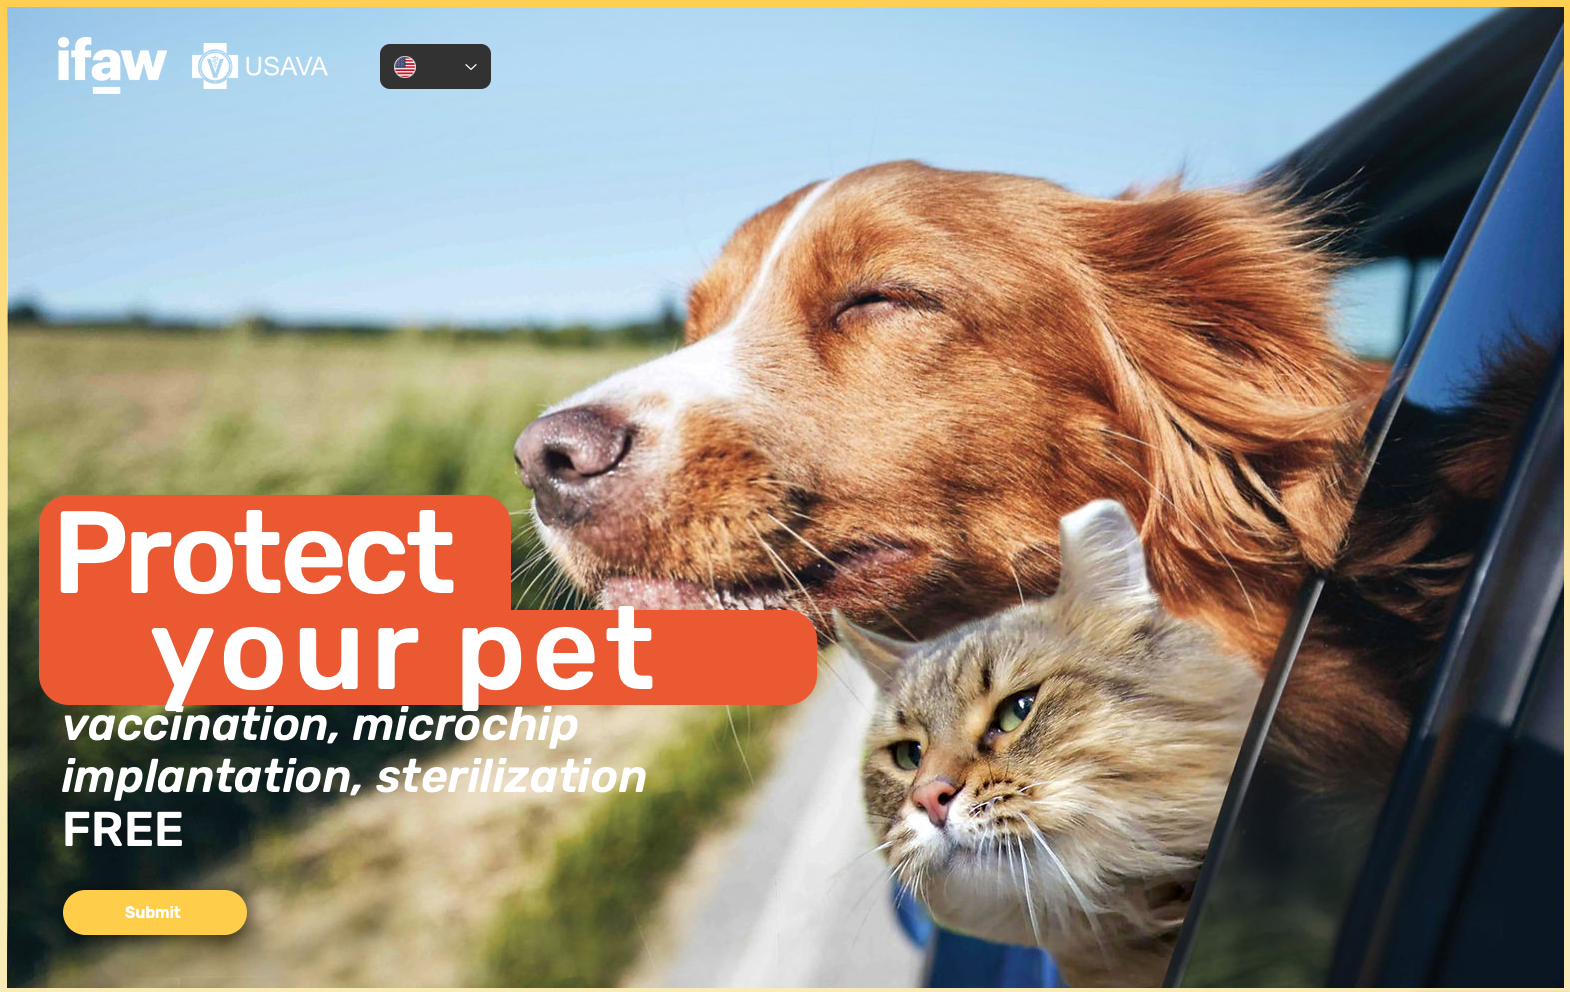 ifaw and USAVA project - Protect your pet - FECAVA